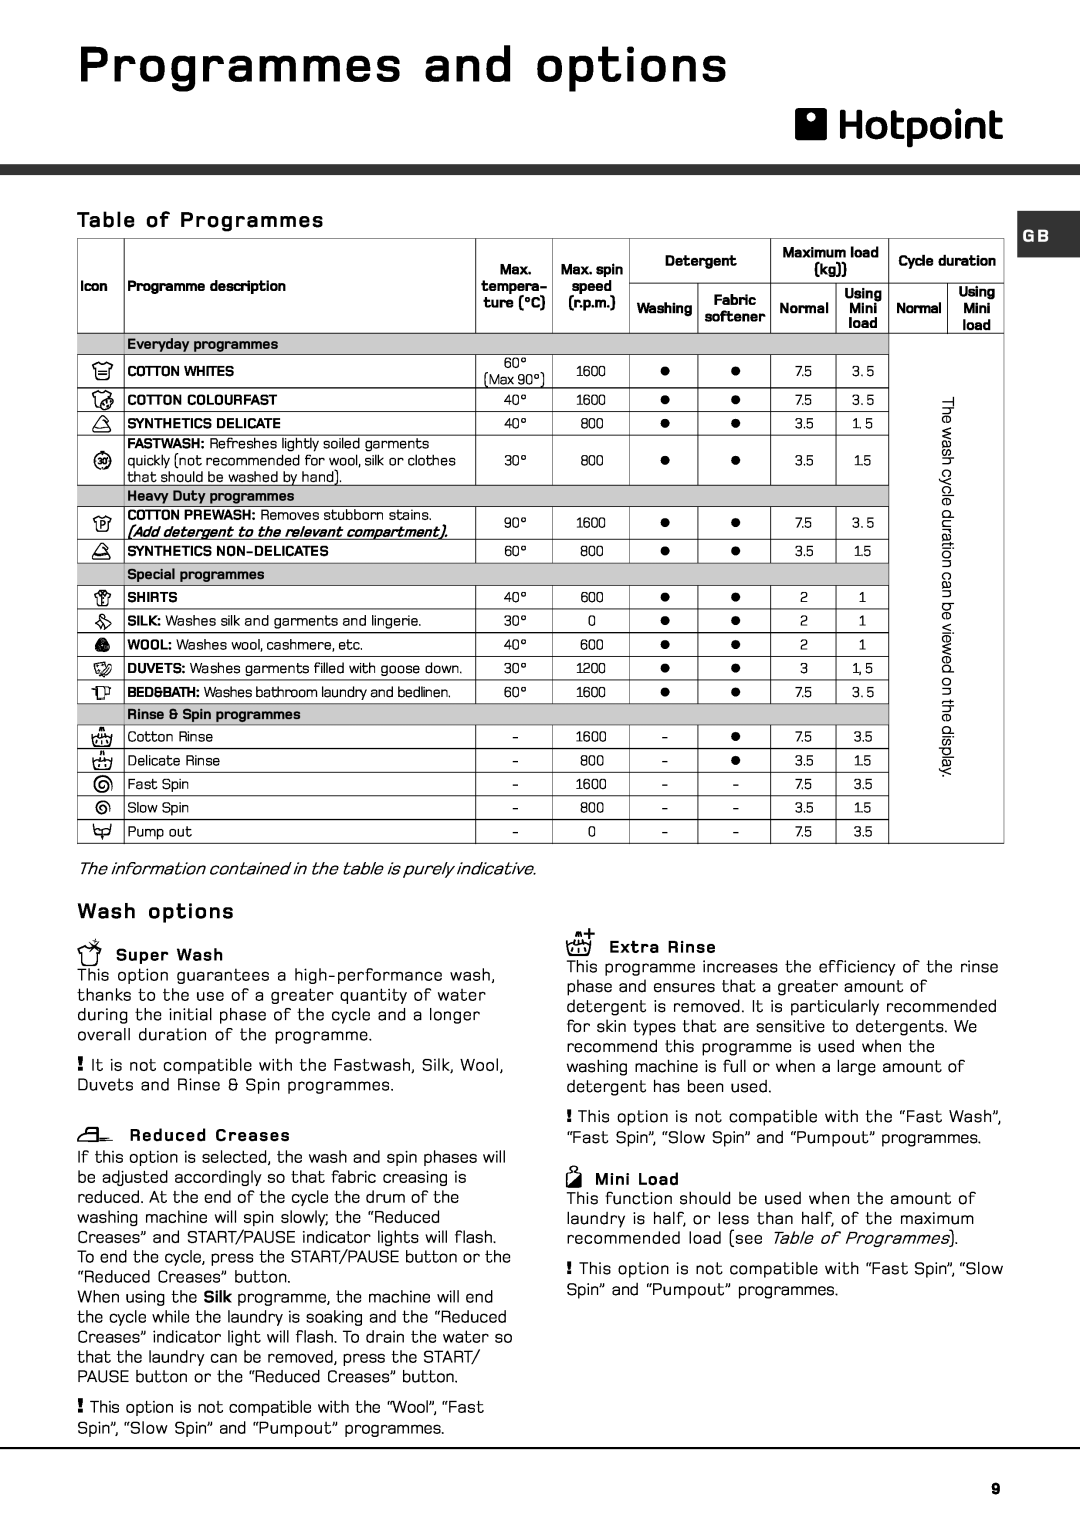 Hotpoint AQXXD 169 manual Programmes and options, Table of Programmes, Wash options 